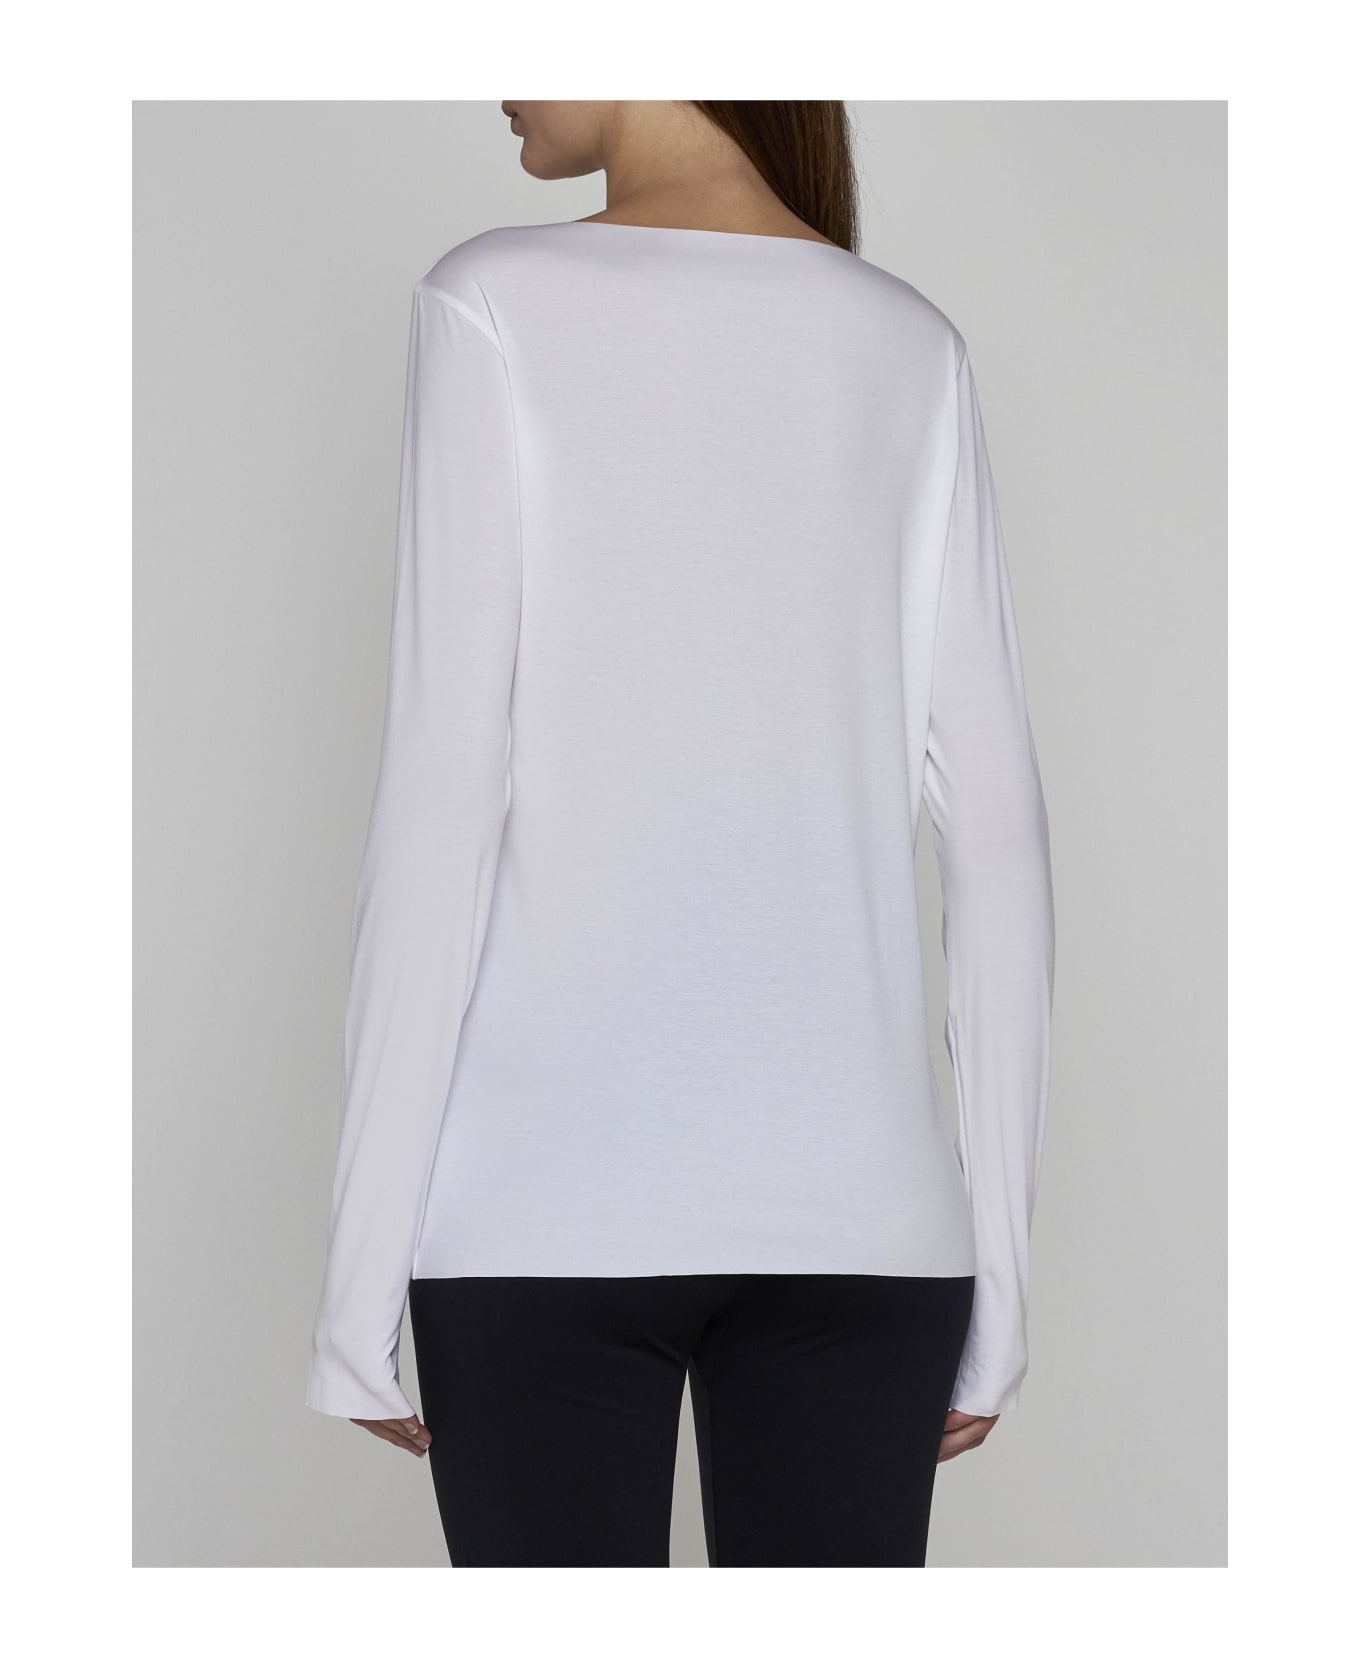 Wolford Aurora Long Sleeves Modal Top - White トップス